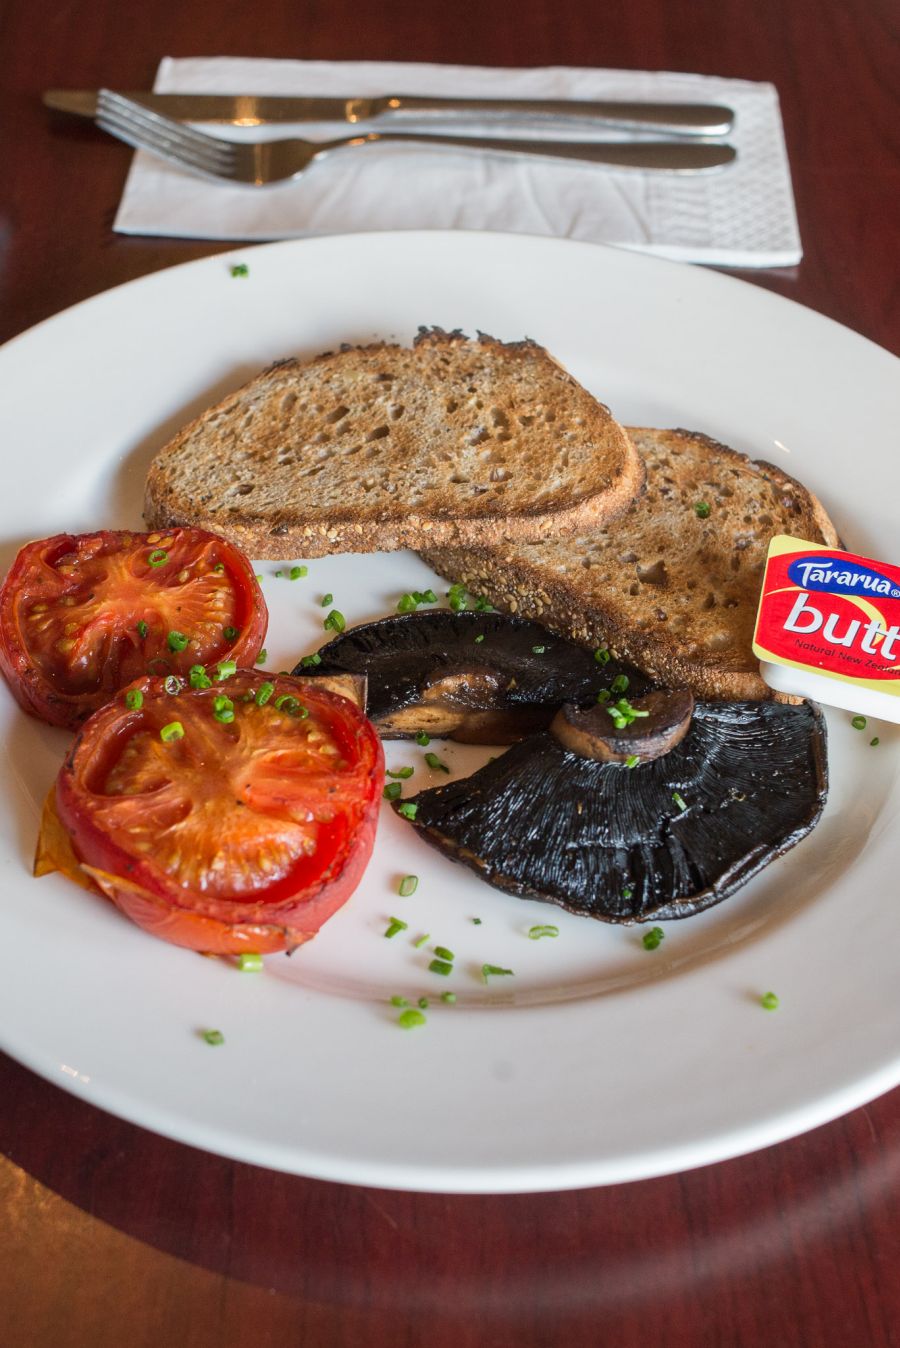 Field mushrooms and tomatoes with wholegrain toast (NZ$11)